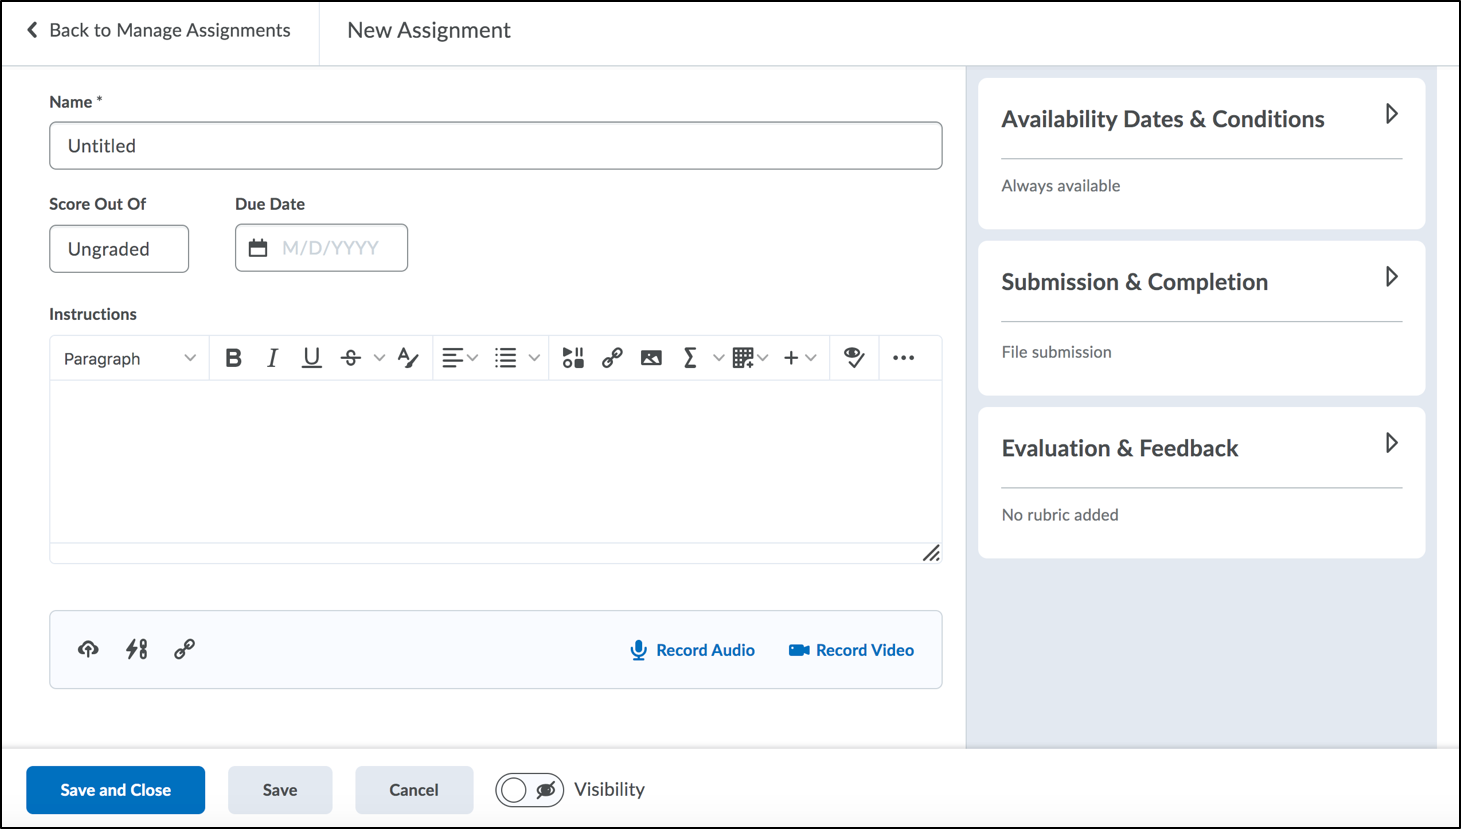 Screenshot of the New Assignment page.